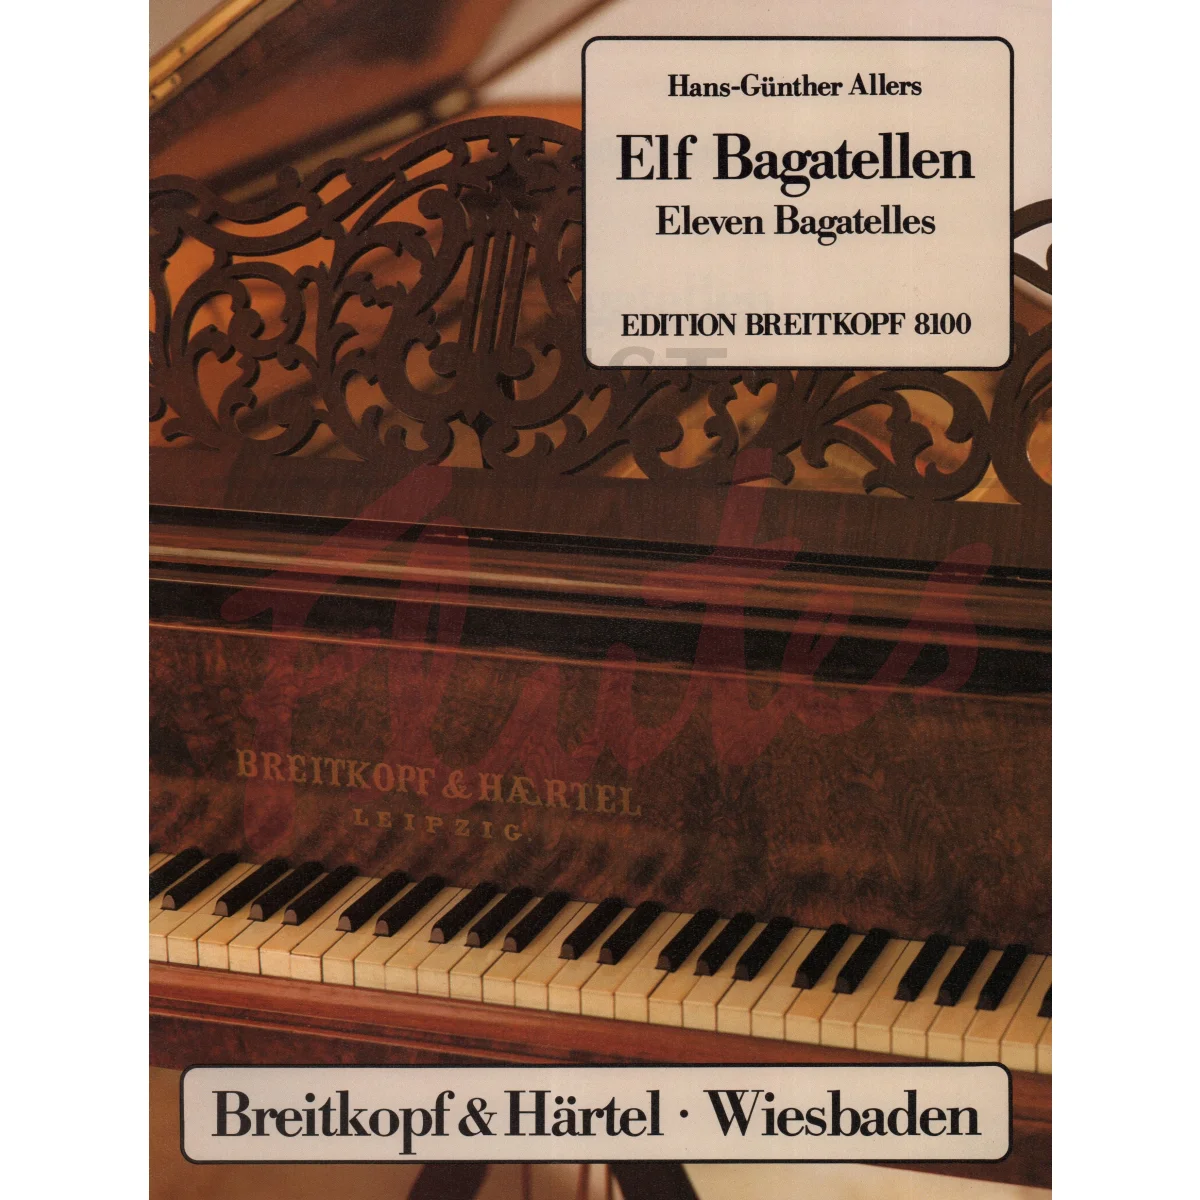 11 Bagatelles for Piano